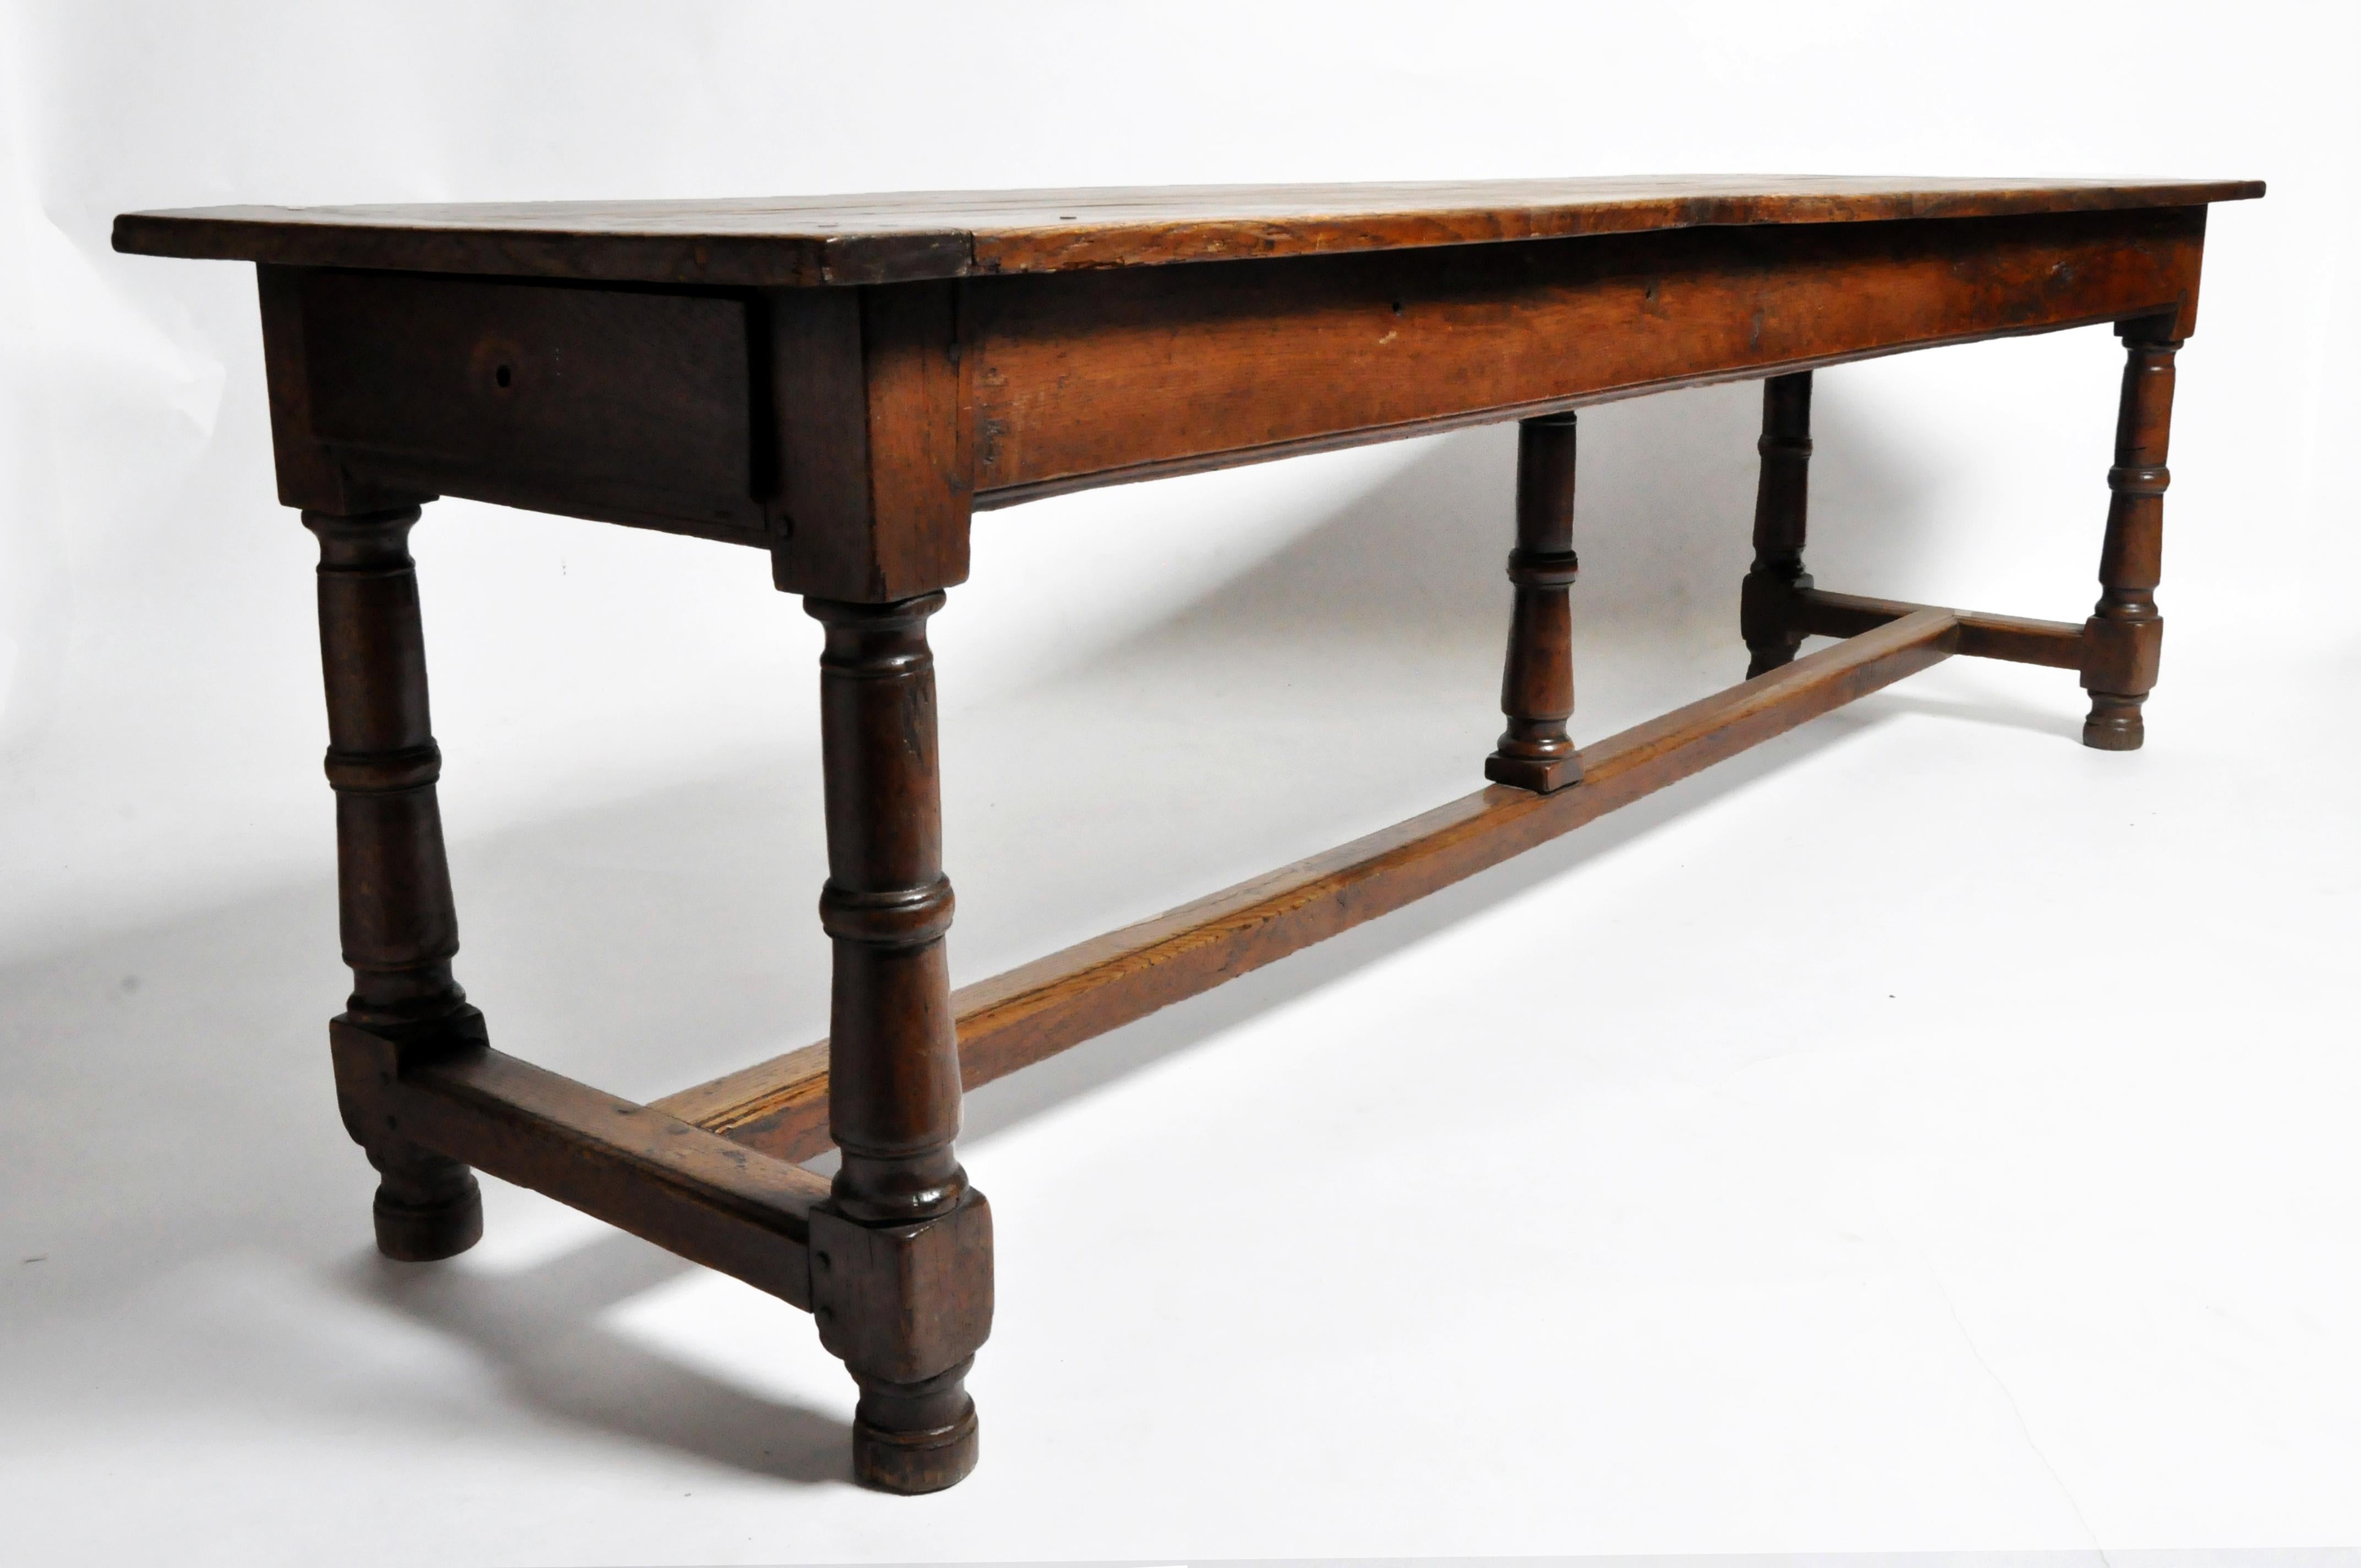 This impressive draper's table is from France and dates to the 19th century and is made from solid oak. The table features two drawers and a beautiful aged patina. The sides and legs retain some of their original darker finish and some antique